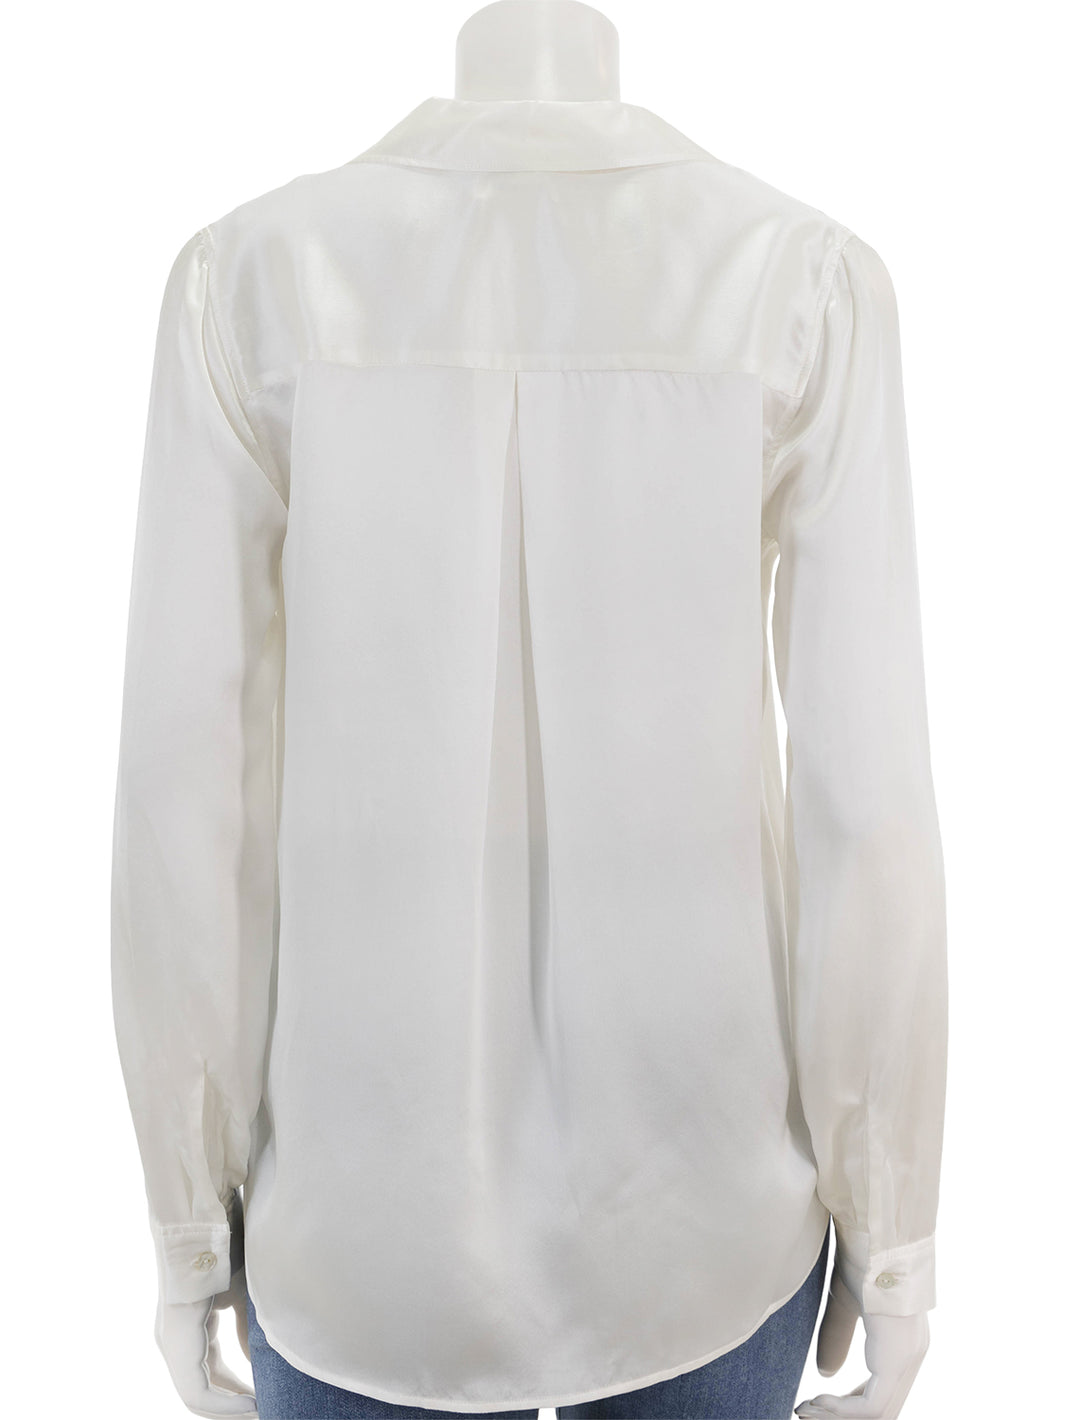 Back view of L'agence's tyler blouse in ivory.